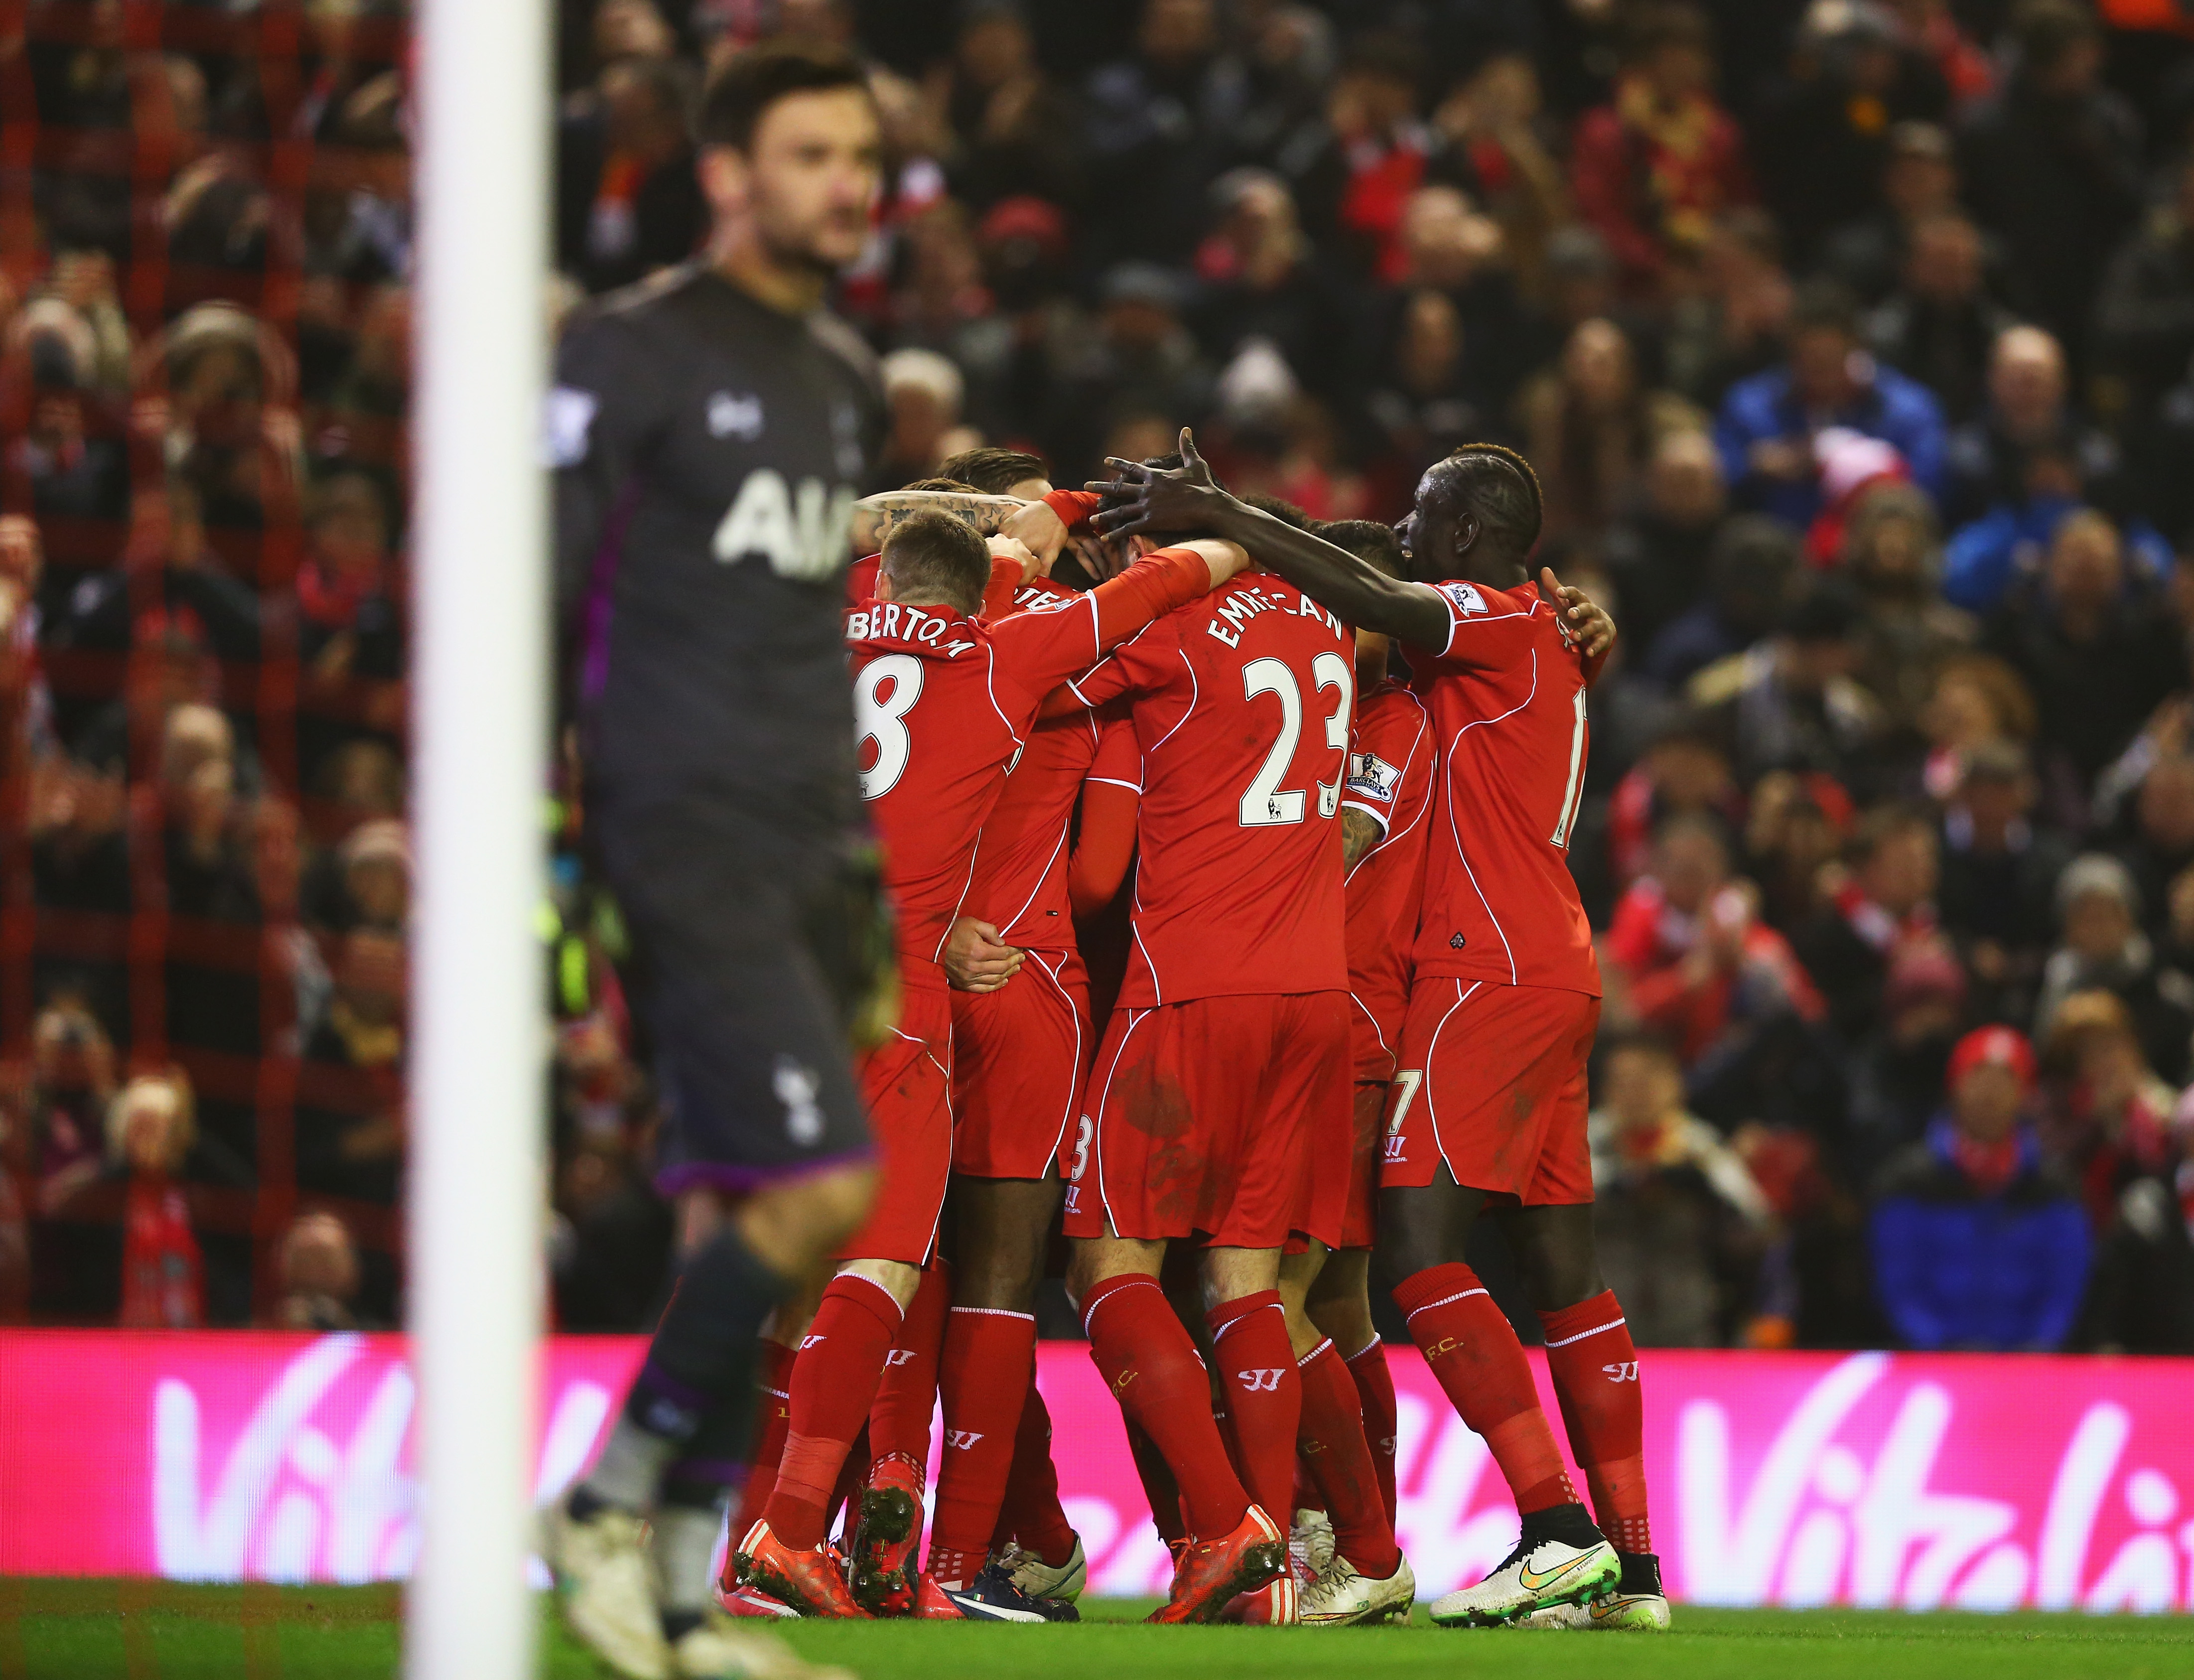 Balotelli was completely mobbed by his team mates after the goal went in. (Getty)